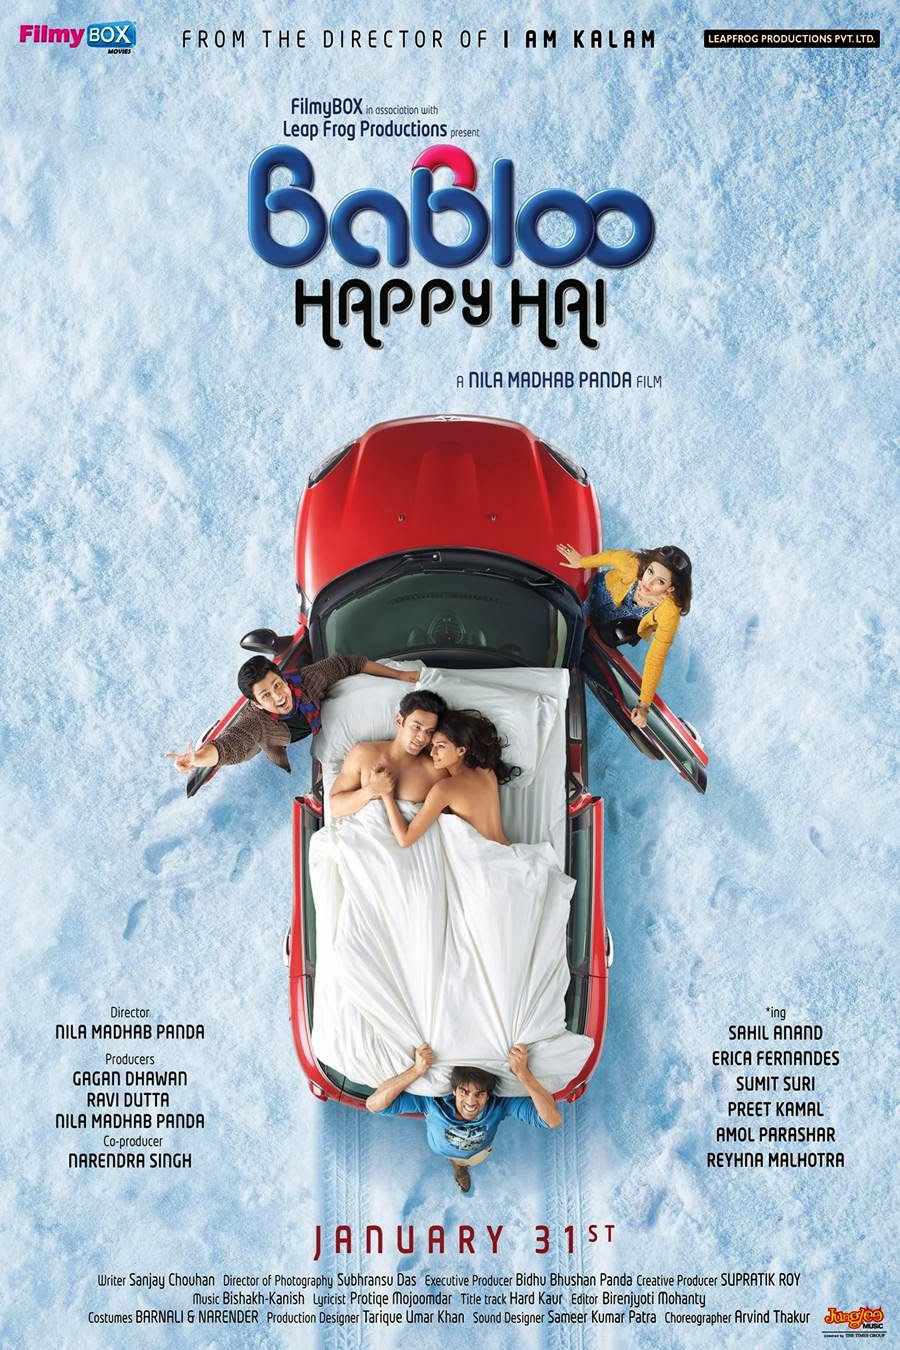 Complete cast and crew of Babloo Happy Hai (2014) bollywood hindi movie wiki, poster, Trailer, music list - Sahil Anand, Erica Fernandes, Sumit Suri and Amol Parashar